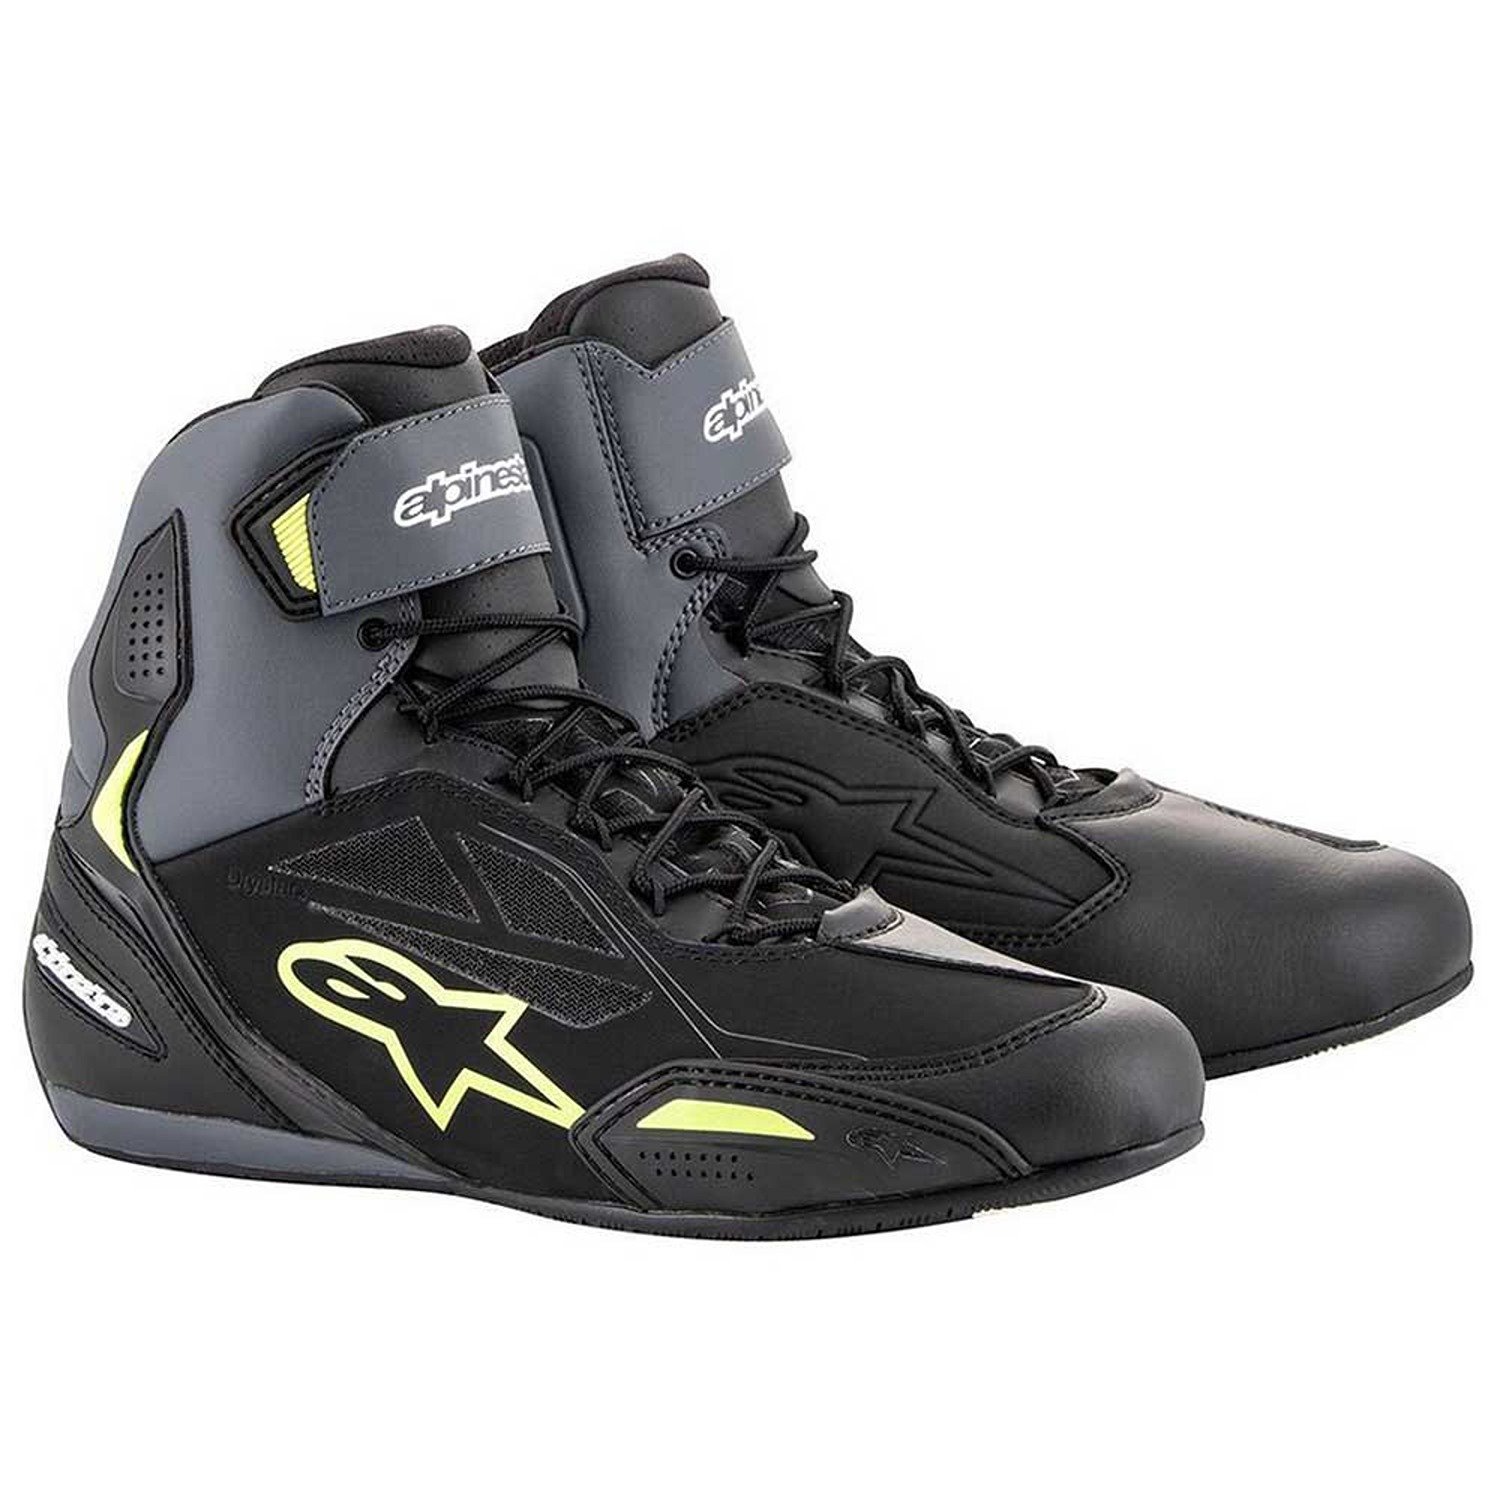 Image of Alpinestars Faster-3 Shoes Black Yellow Fluo Size US 95 EN